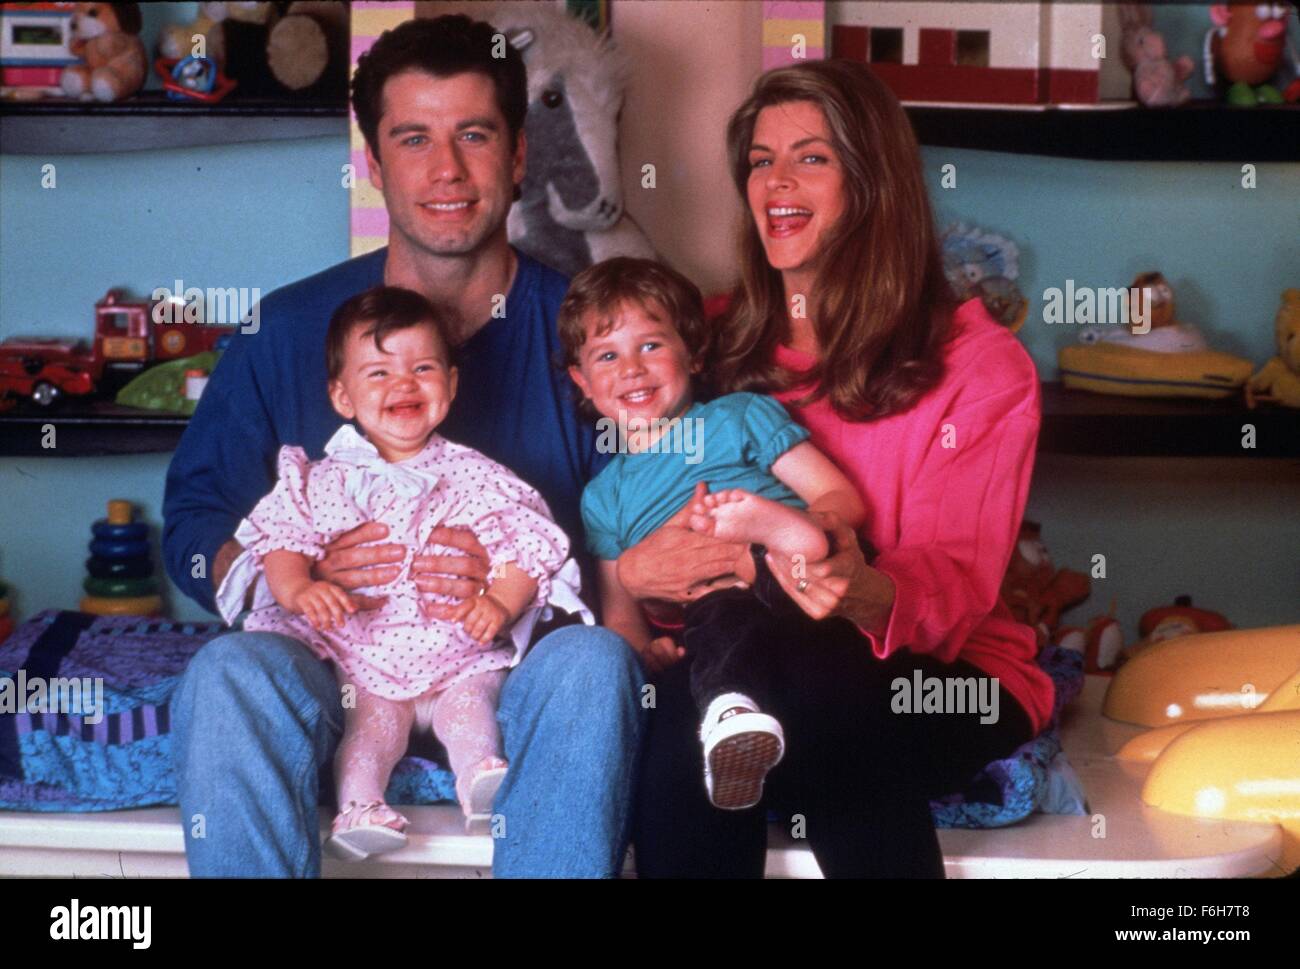 RELEASE DATE: December 14, 1990   MOVIE TITLE: Look Who's Talking Too   STUDIO: TriStar Pictures   DIRECTOR: Amy Heckerling  PLOT: Small babies comment on the disagreements between a husband and wife.   PICTURED: KIRSTIE ALLEY as Mollie, MEGAN MILNER as Julie, LORNE SUSSMAN as Mikey, and JOHN TRAVOLTA as James.   (Credit Image: c TriStar/Entertainment Pictures) Stock Photo